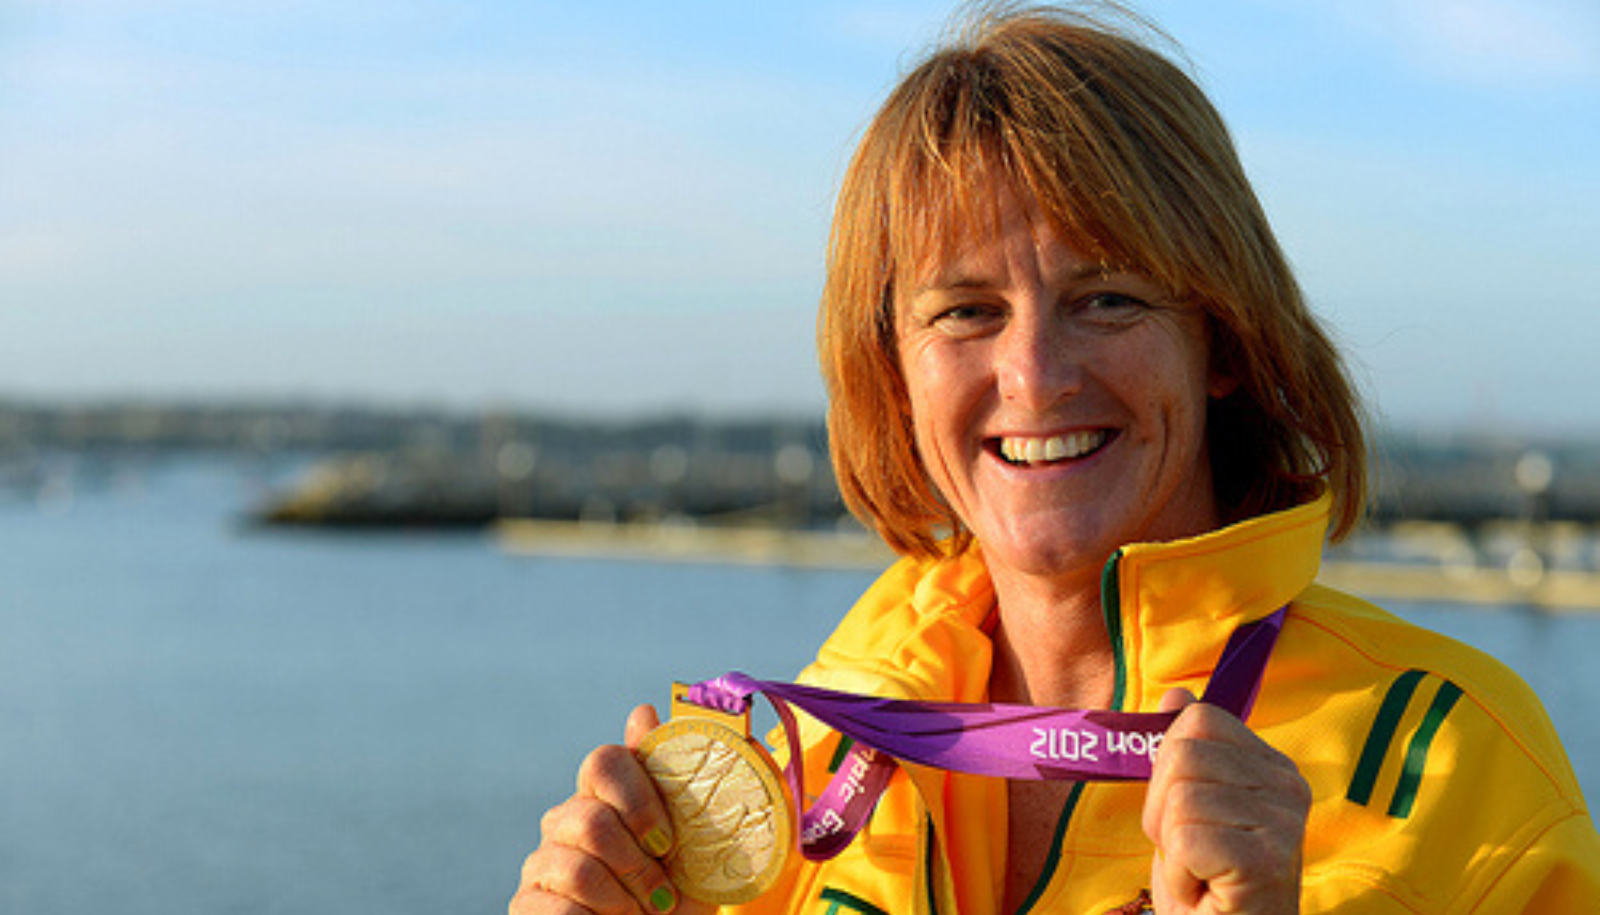 : Liesl Tesch wearing Australian team colors and holding a gold medal at the London 2012 Paralympic Games.